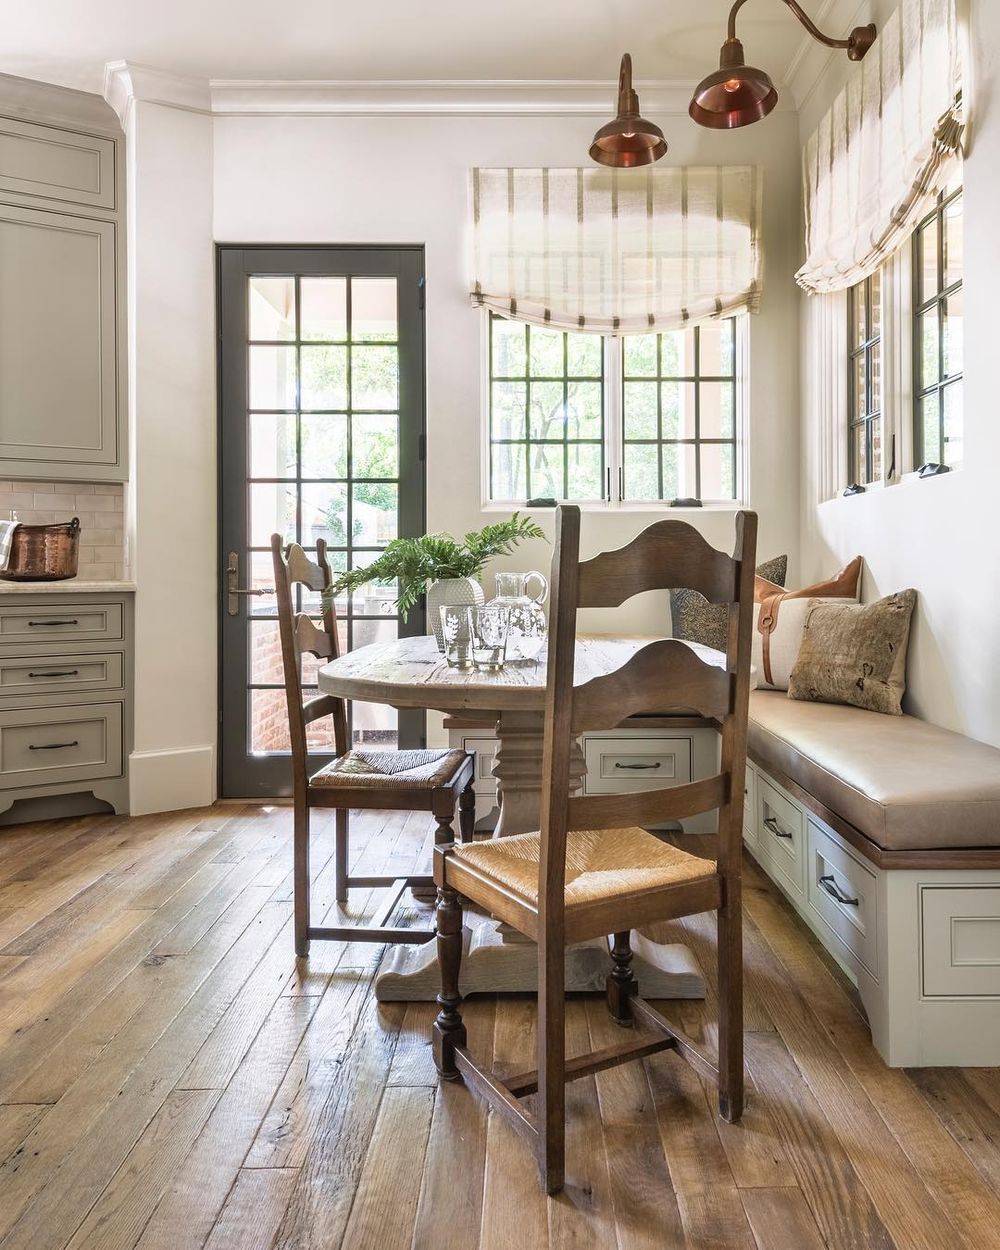 Rustic Country Breakfast Nook with Wood Table and Chairs via @marieflaniganinteriors